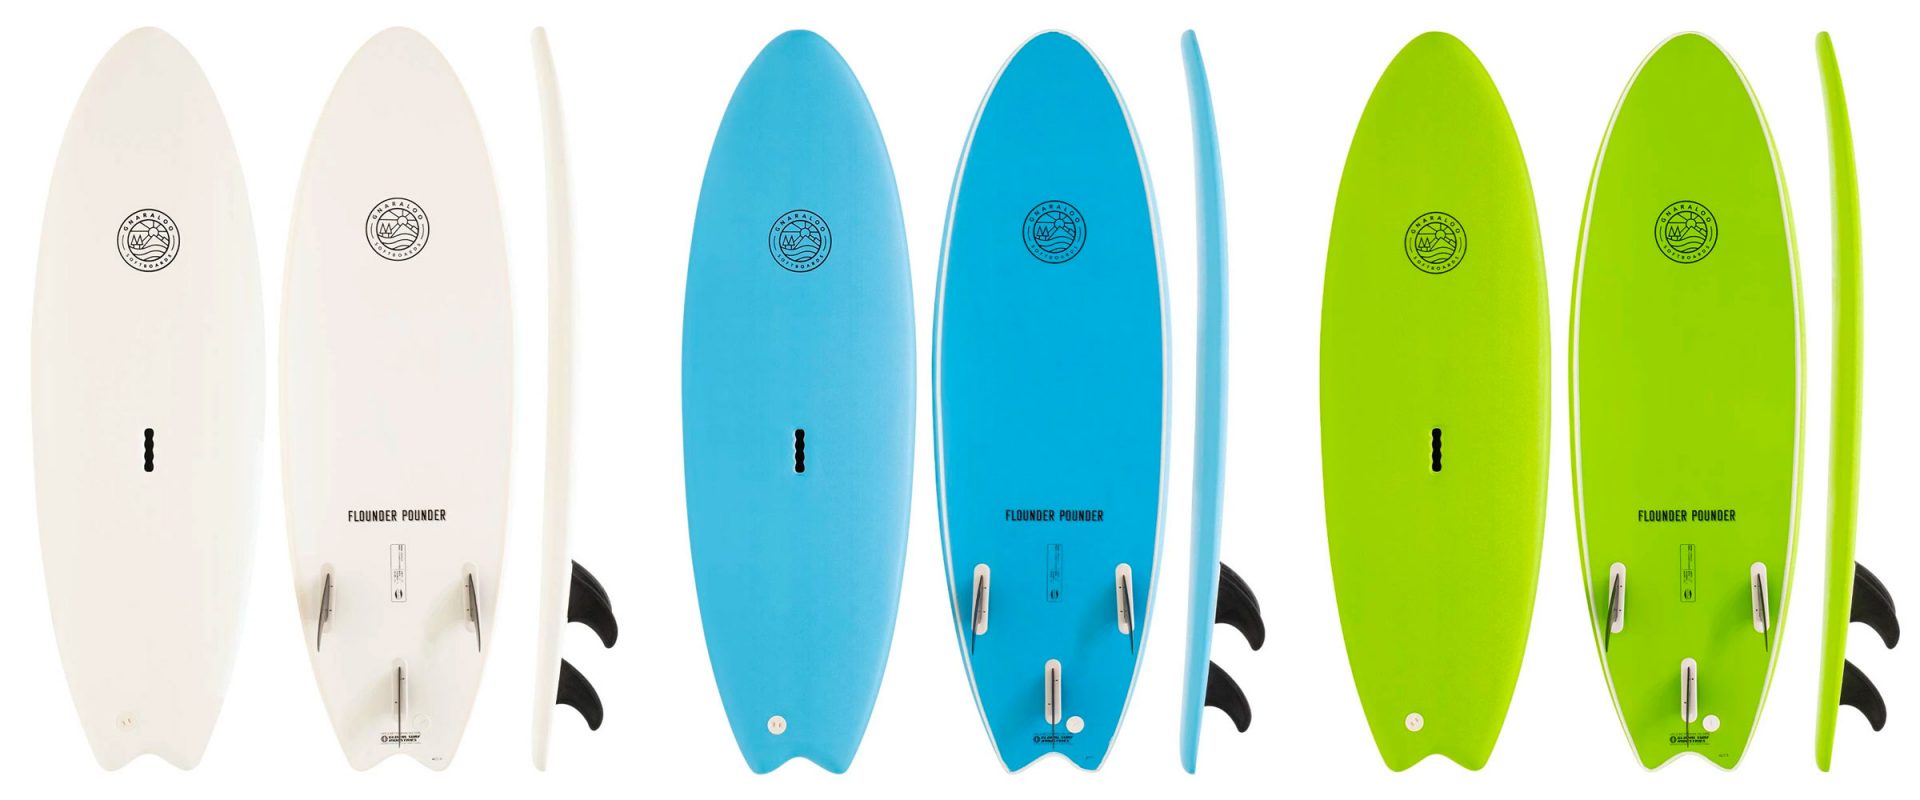 the best surfboards for kids - flounder pounder by gsi